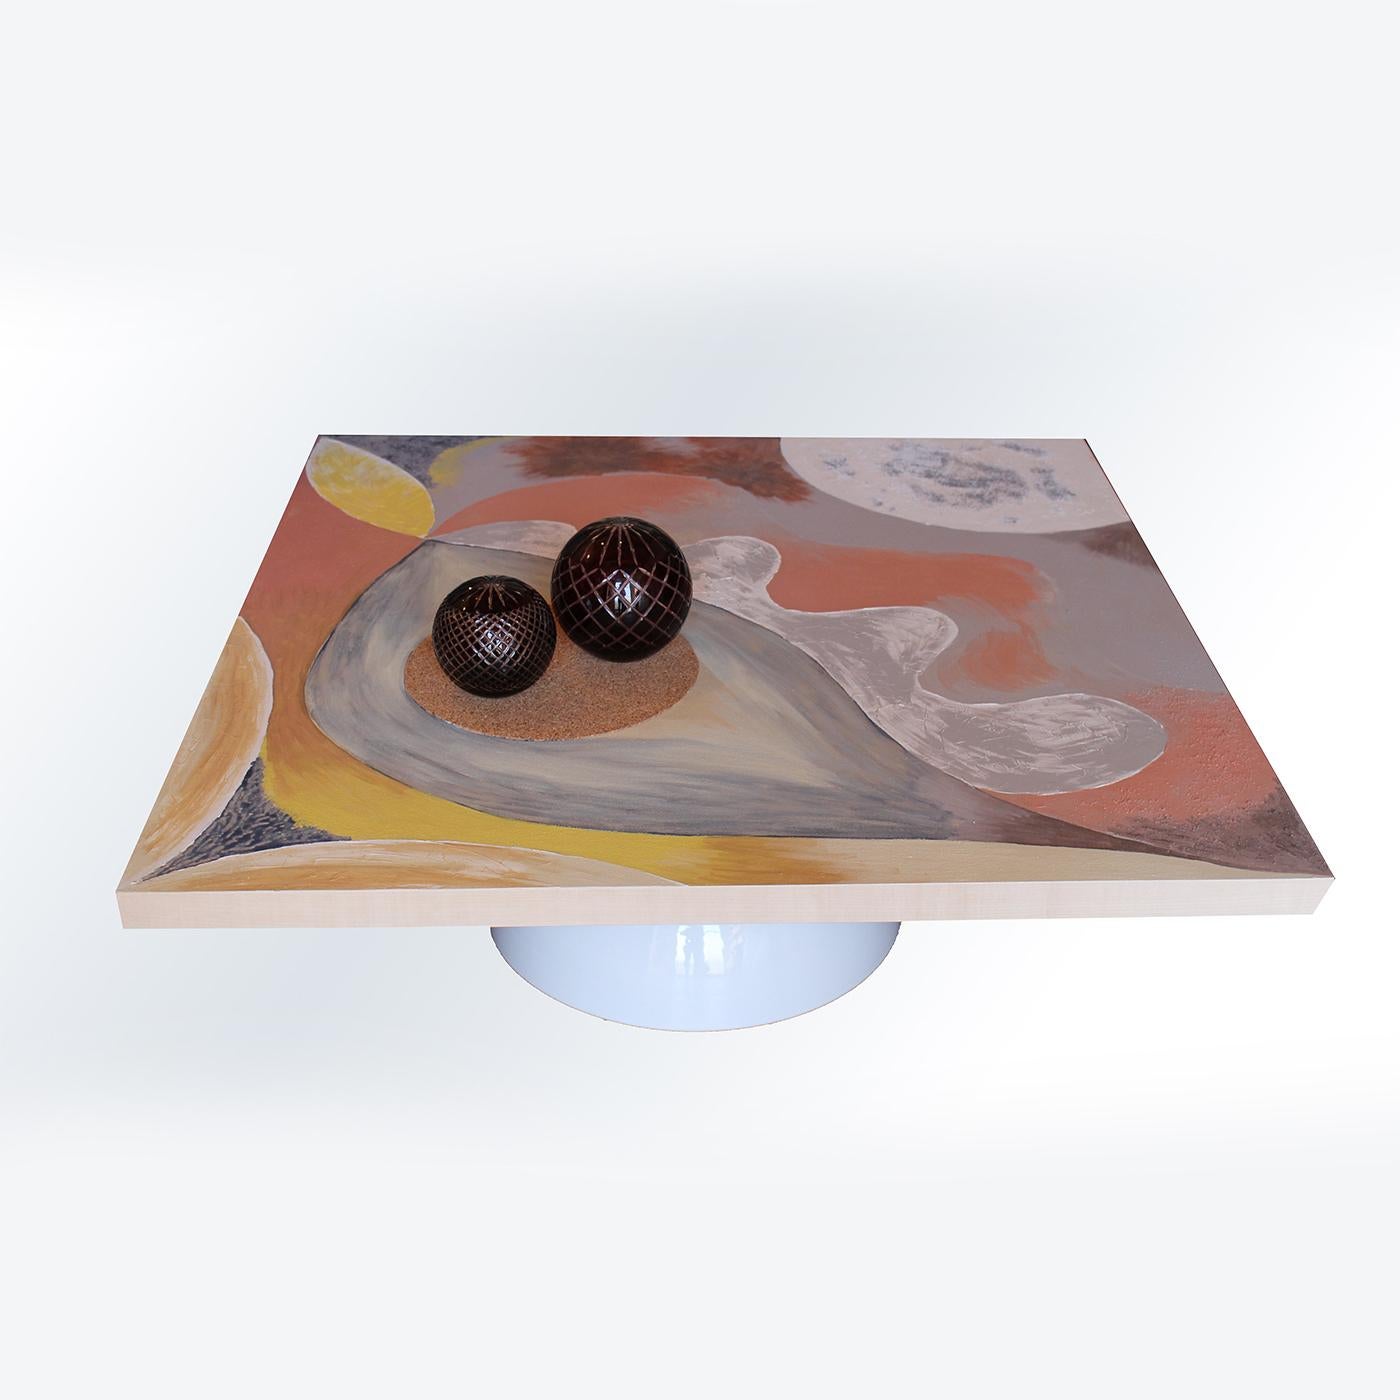 Brimming with artistic allure, this superb table was designed in 2019 by Mascia Meccani. The square wooden top features a maple finish and boasts abstract, mixed-media decorations that enchant with the sophistication of their earthy and pastel